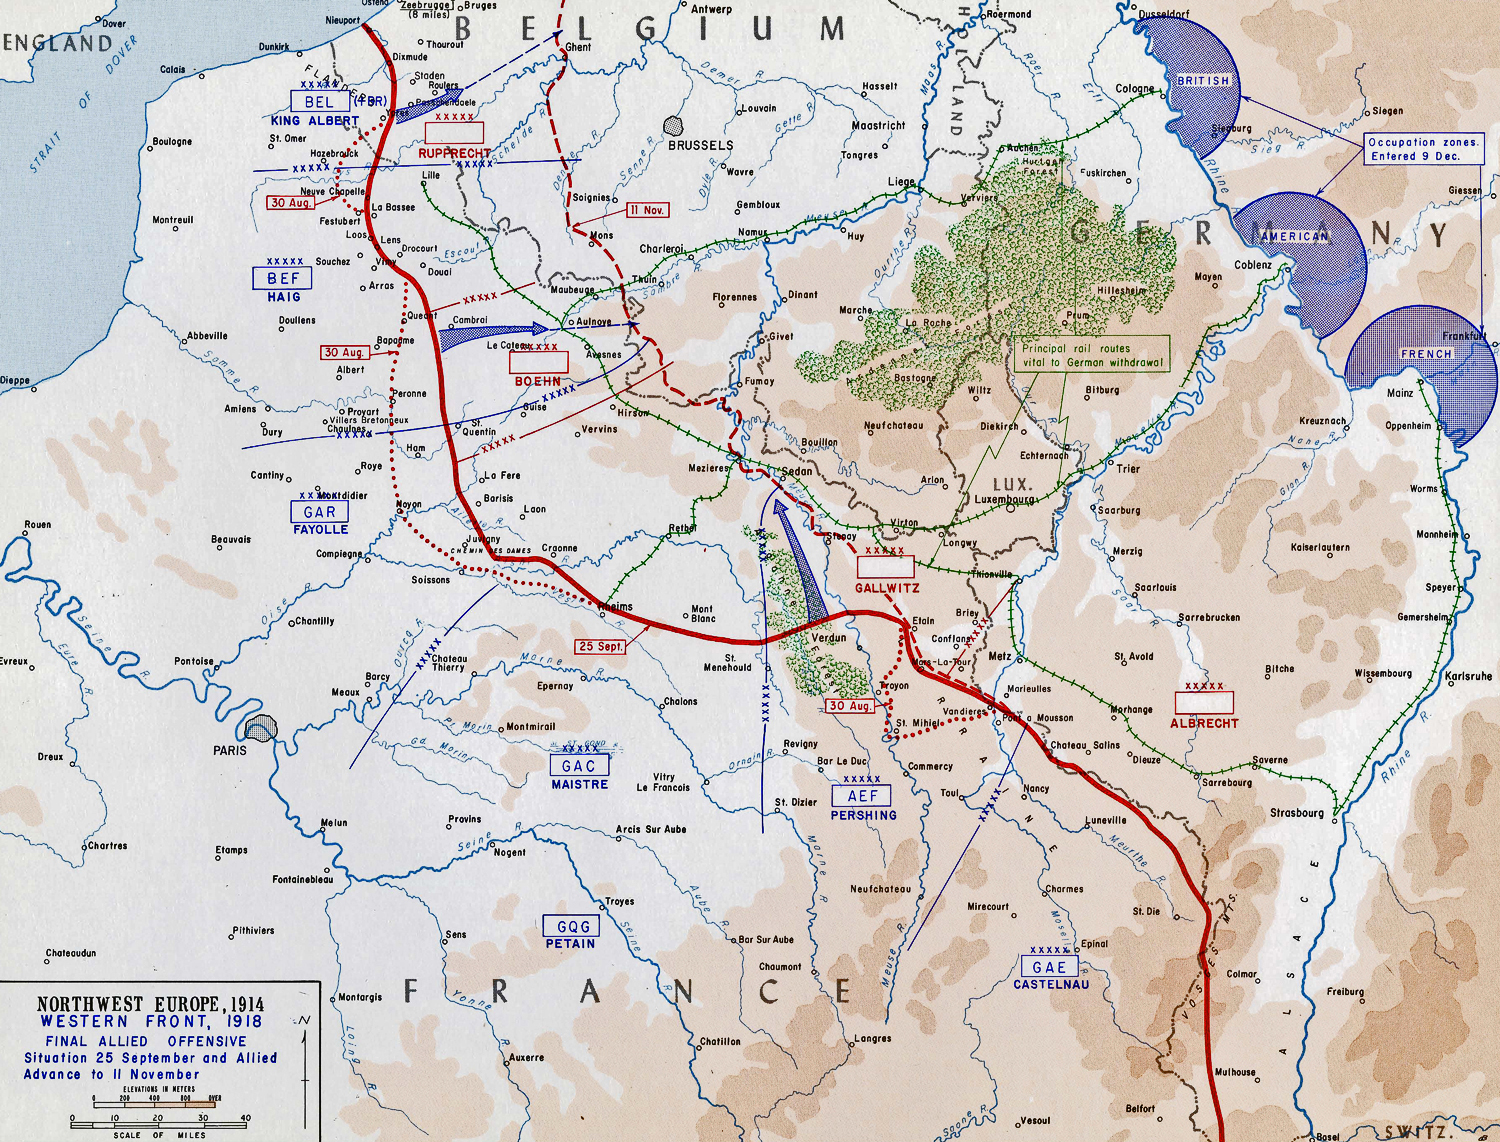 Map of WWI: Western Front - Sept 25-Nov 11, 1918 - Final Allied Offensive